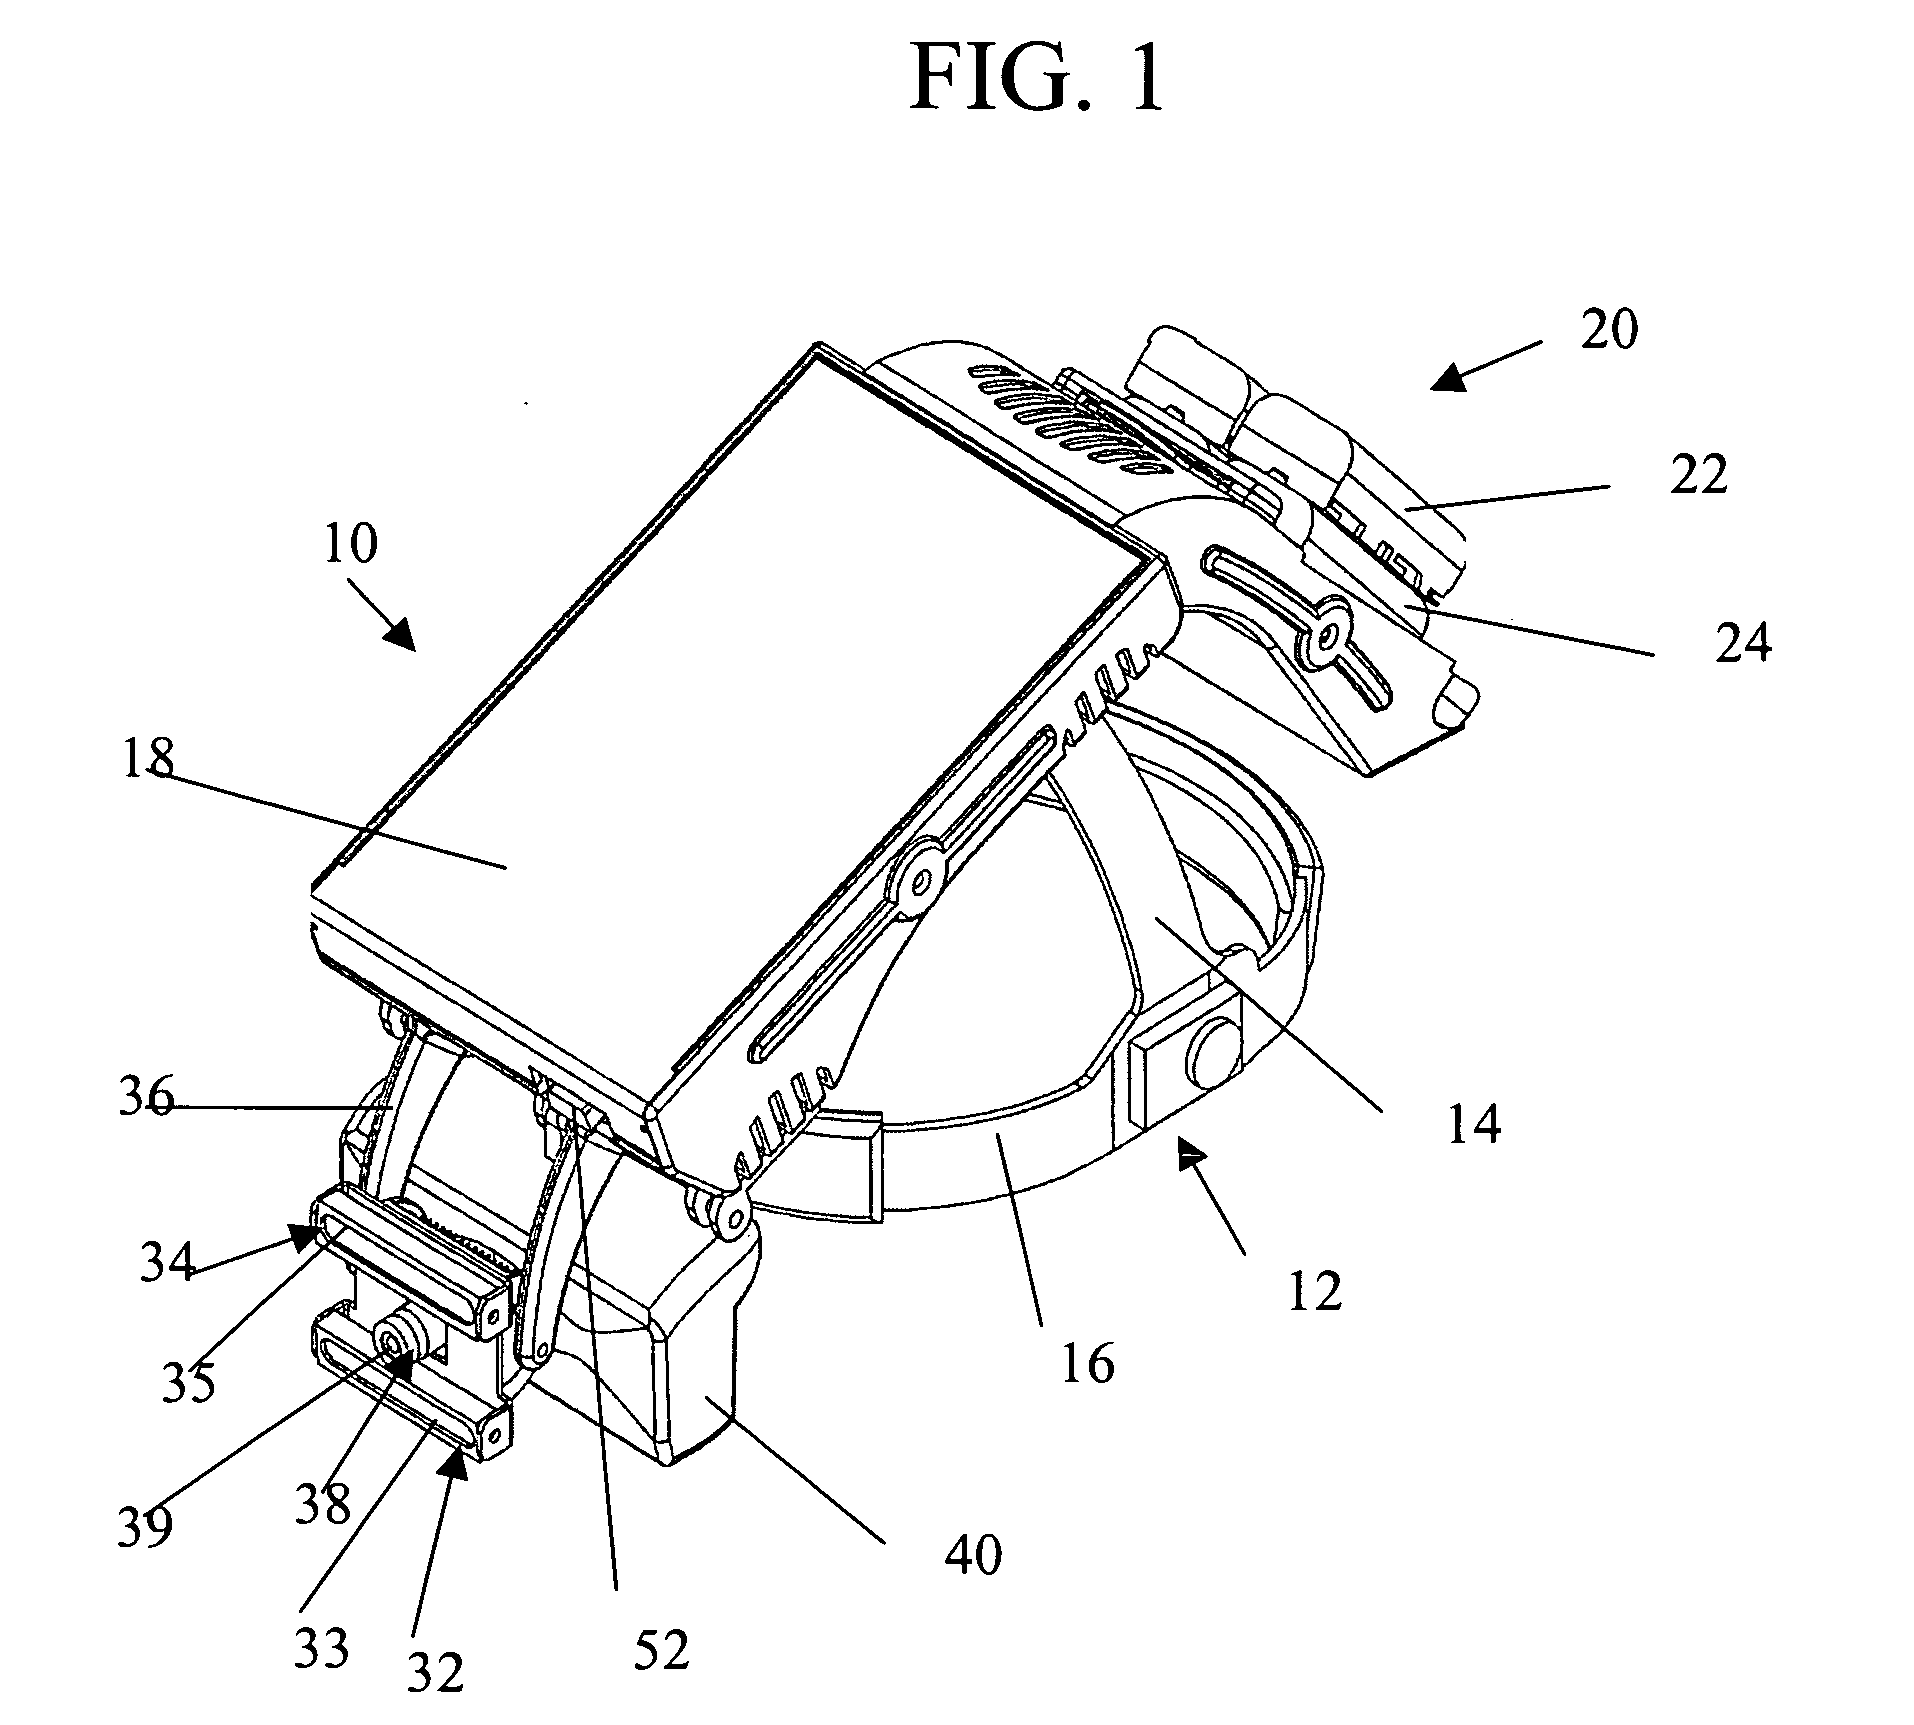 Delivery device, system, and method for delivering substances into blood vessels